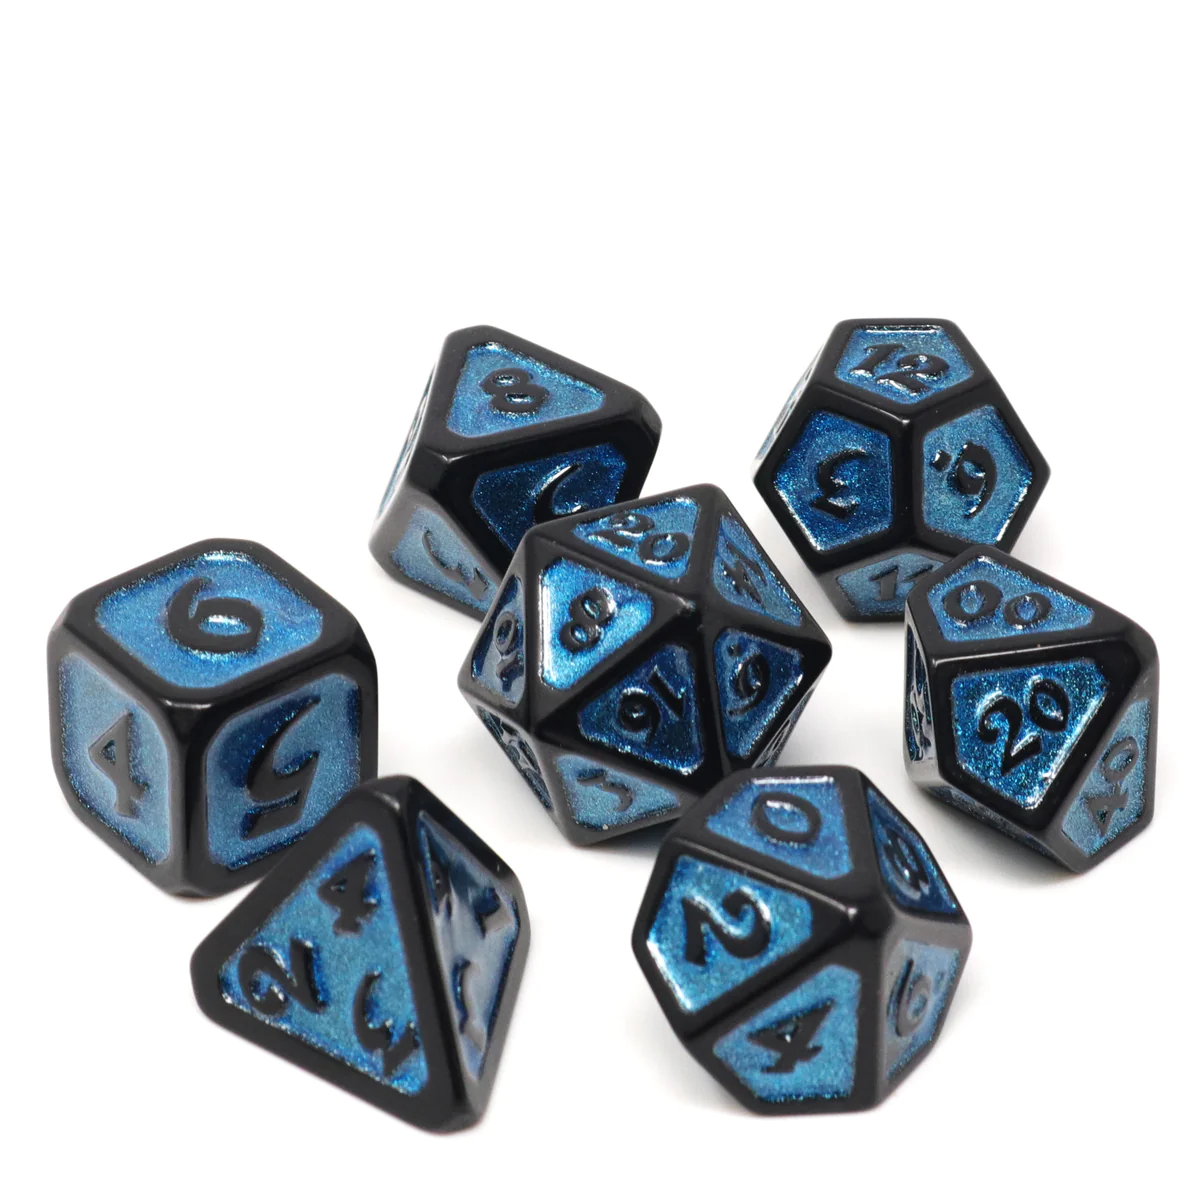 FROST BITE DIAGLYPH DICE SET